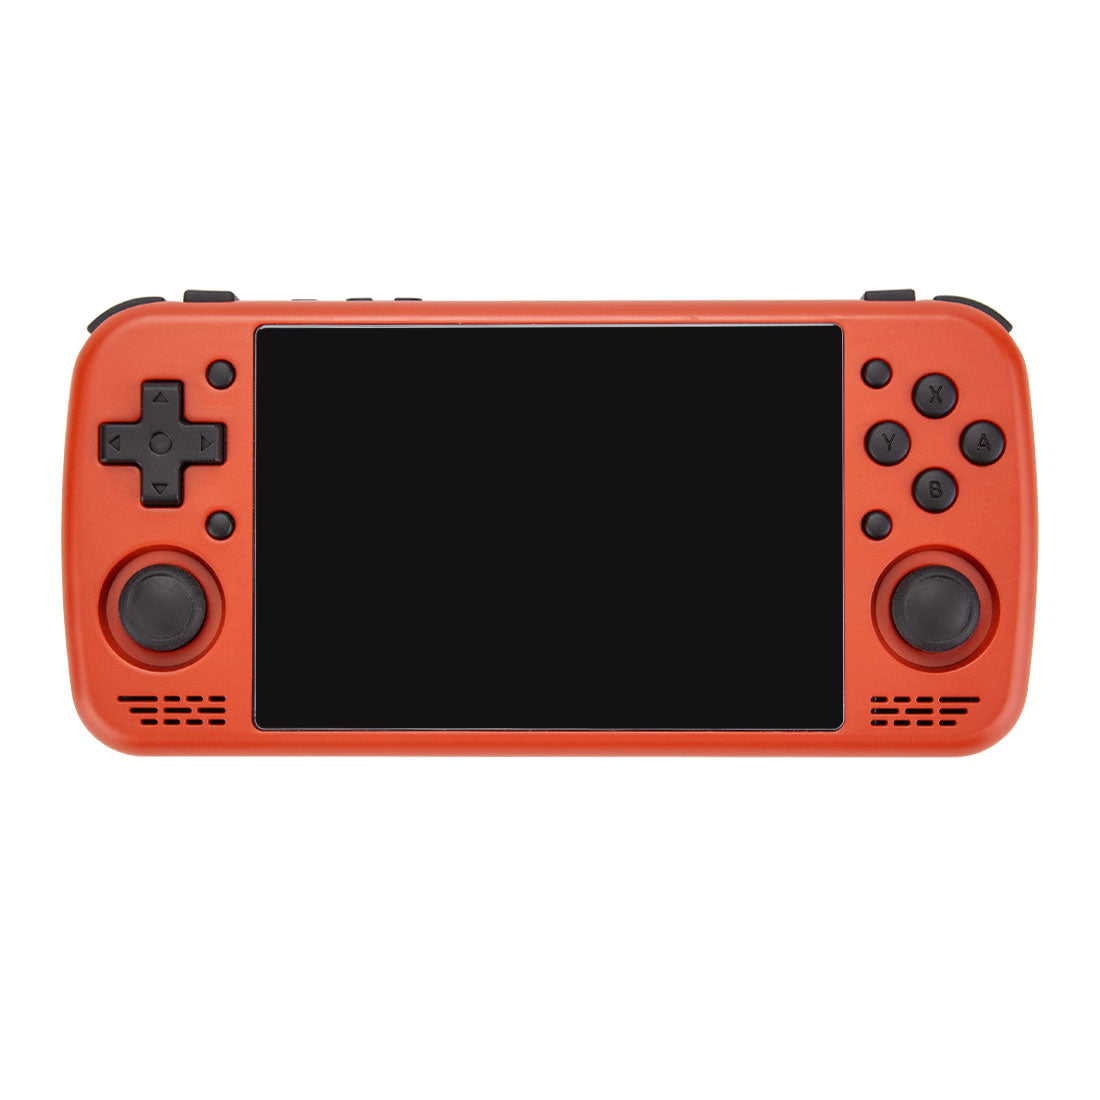 KT-R1 G99 Android Retro Handheld Game Game Console (Plastic Shell) - Mechdiy